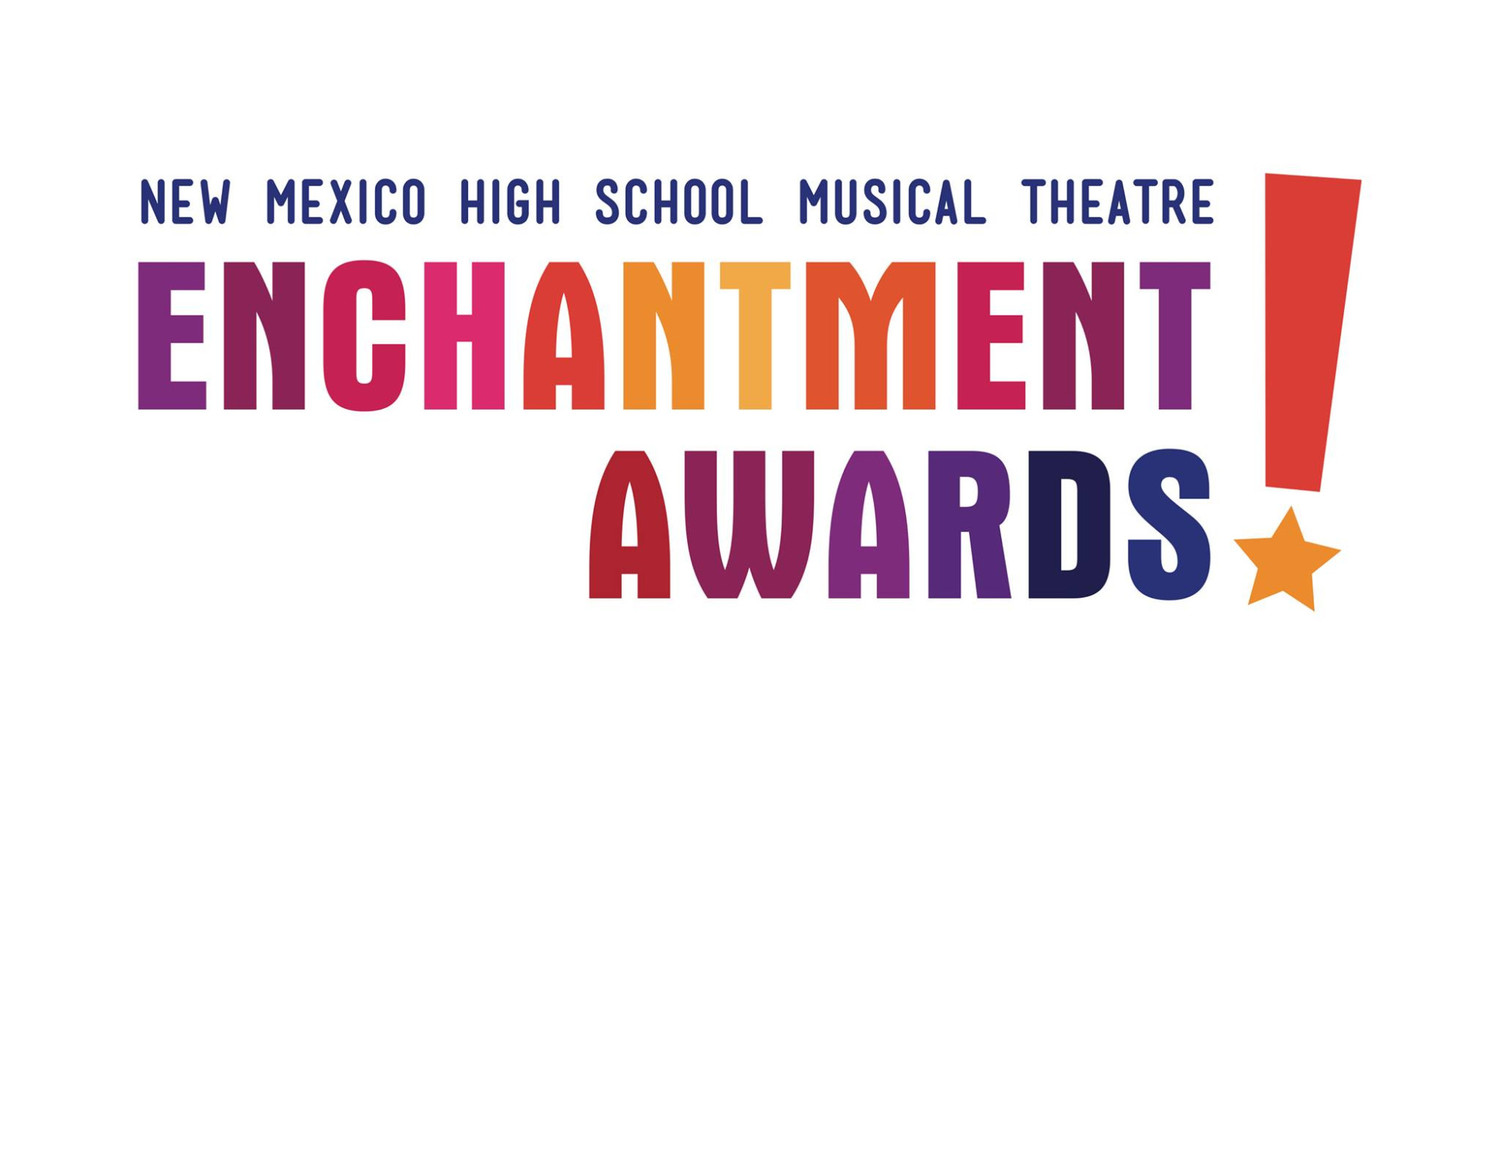 Feature: Nominations Announced for 2019 New Mexico High School Musical Theatre Enchantment Awards 